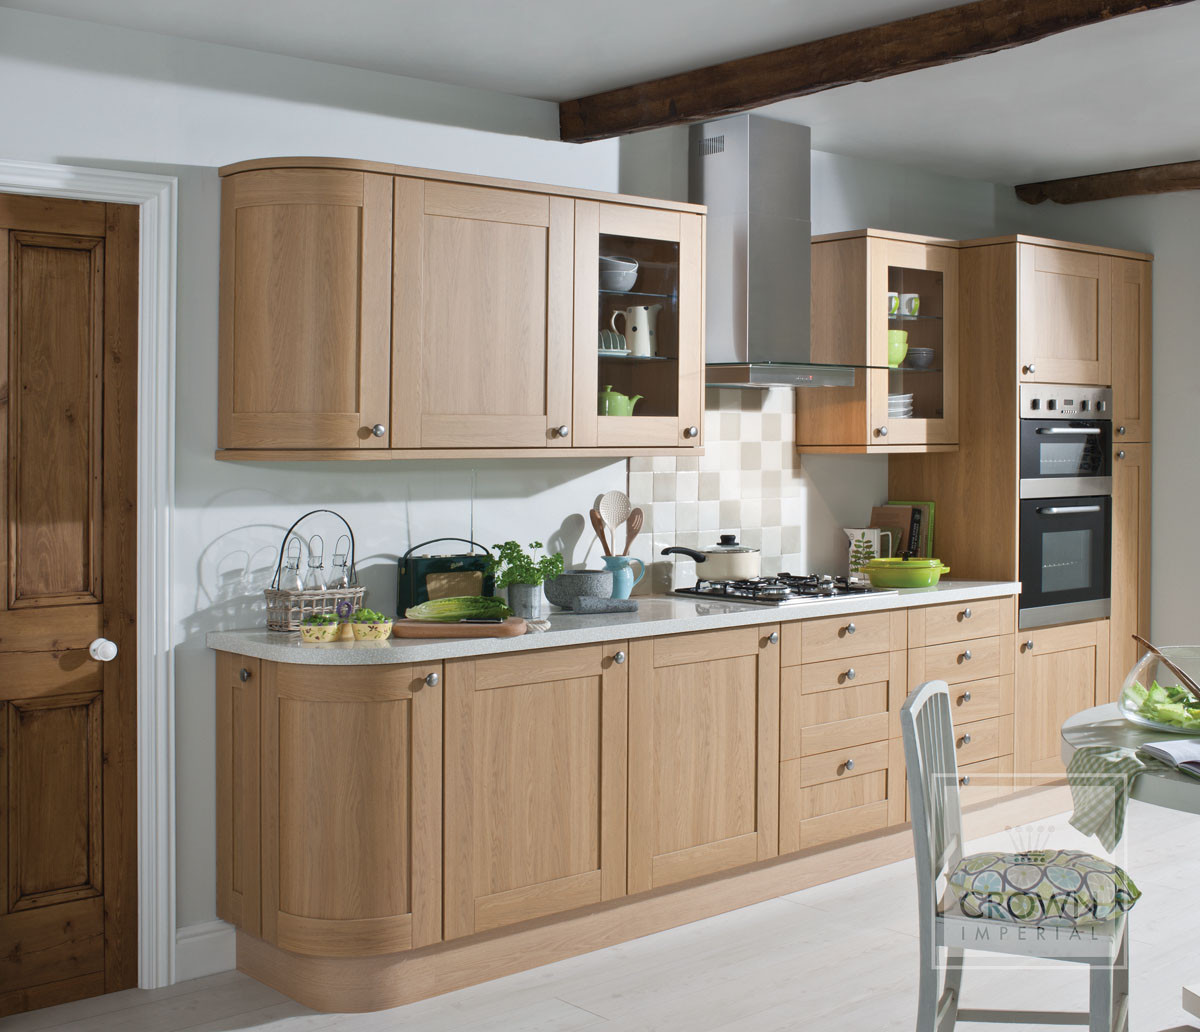 Small Kitchen Design Pics
 Three top tips for small kitchen design